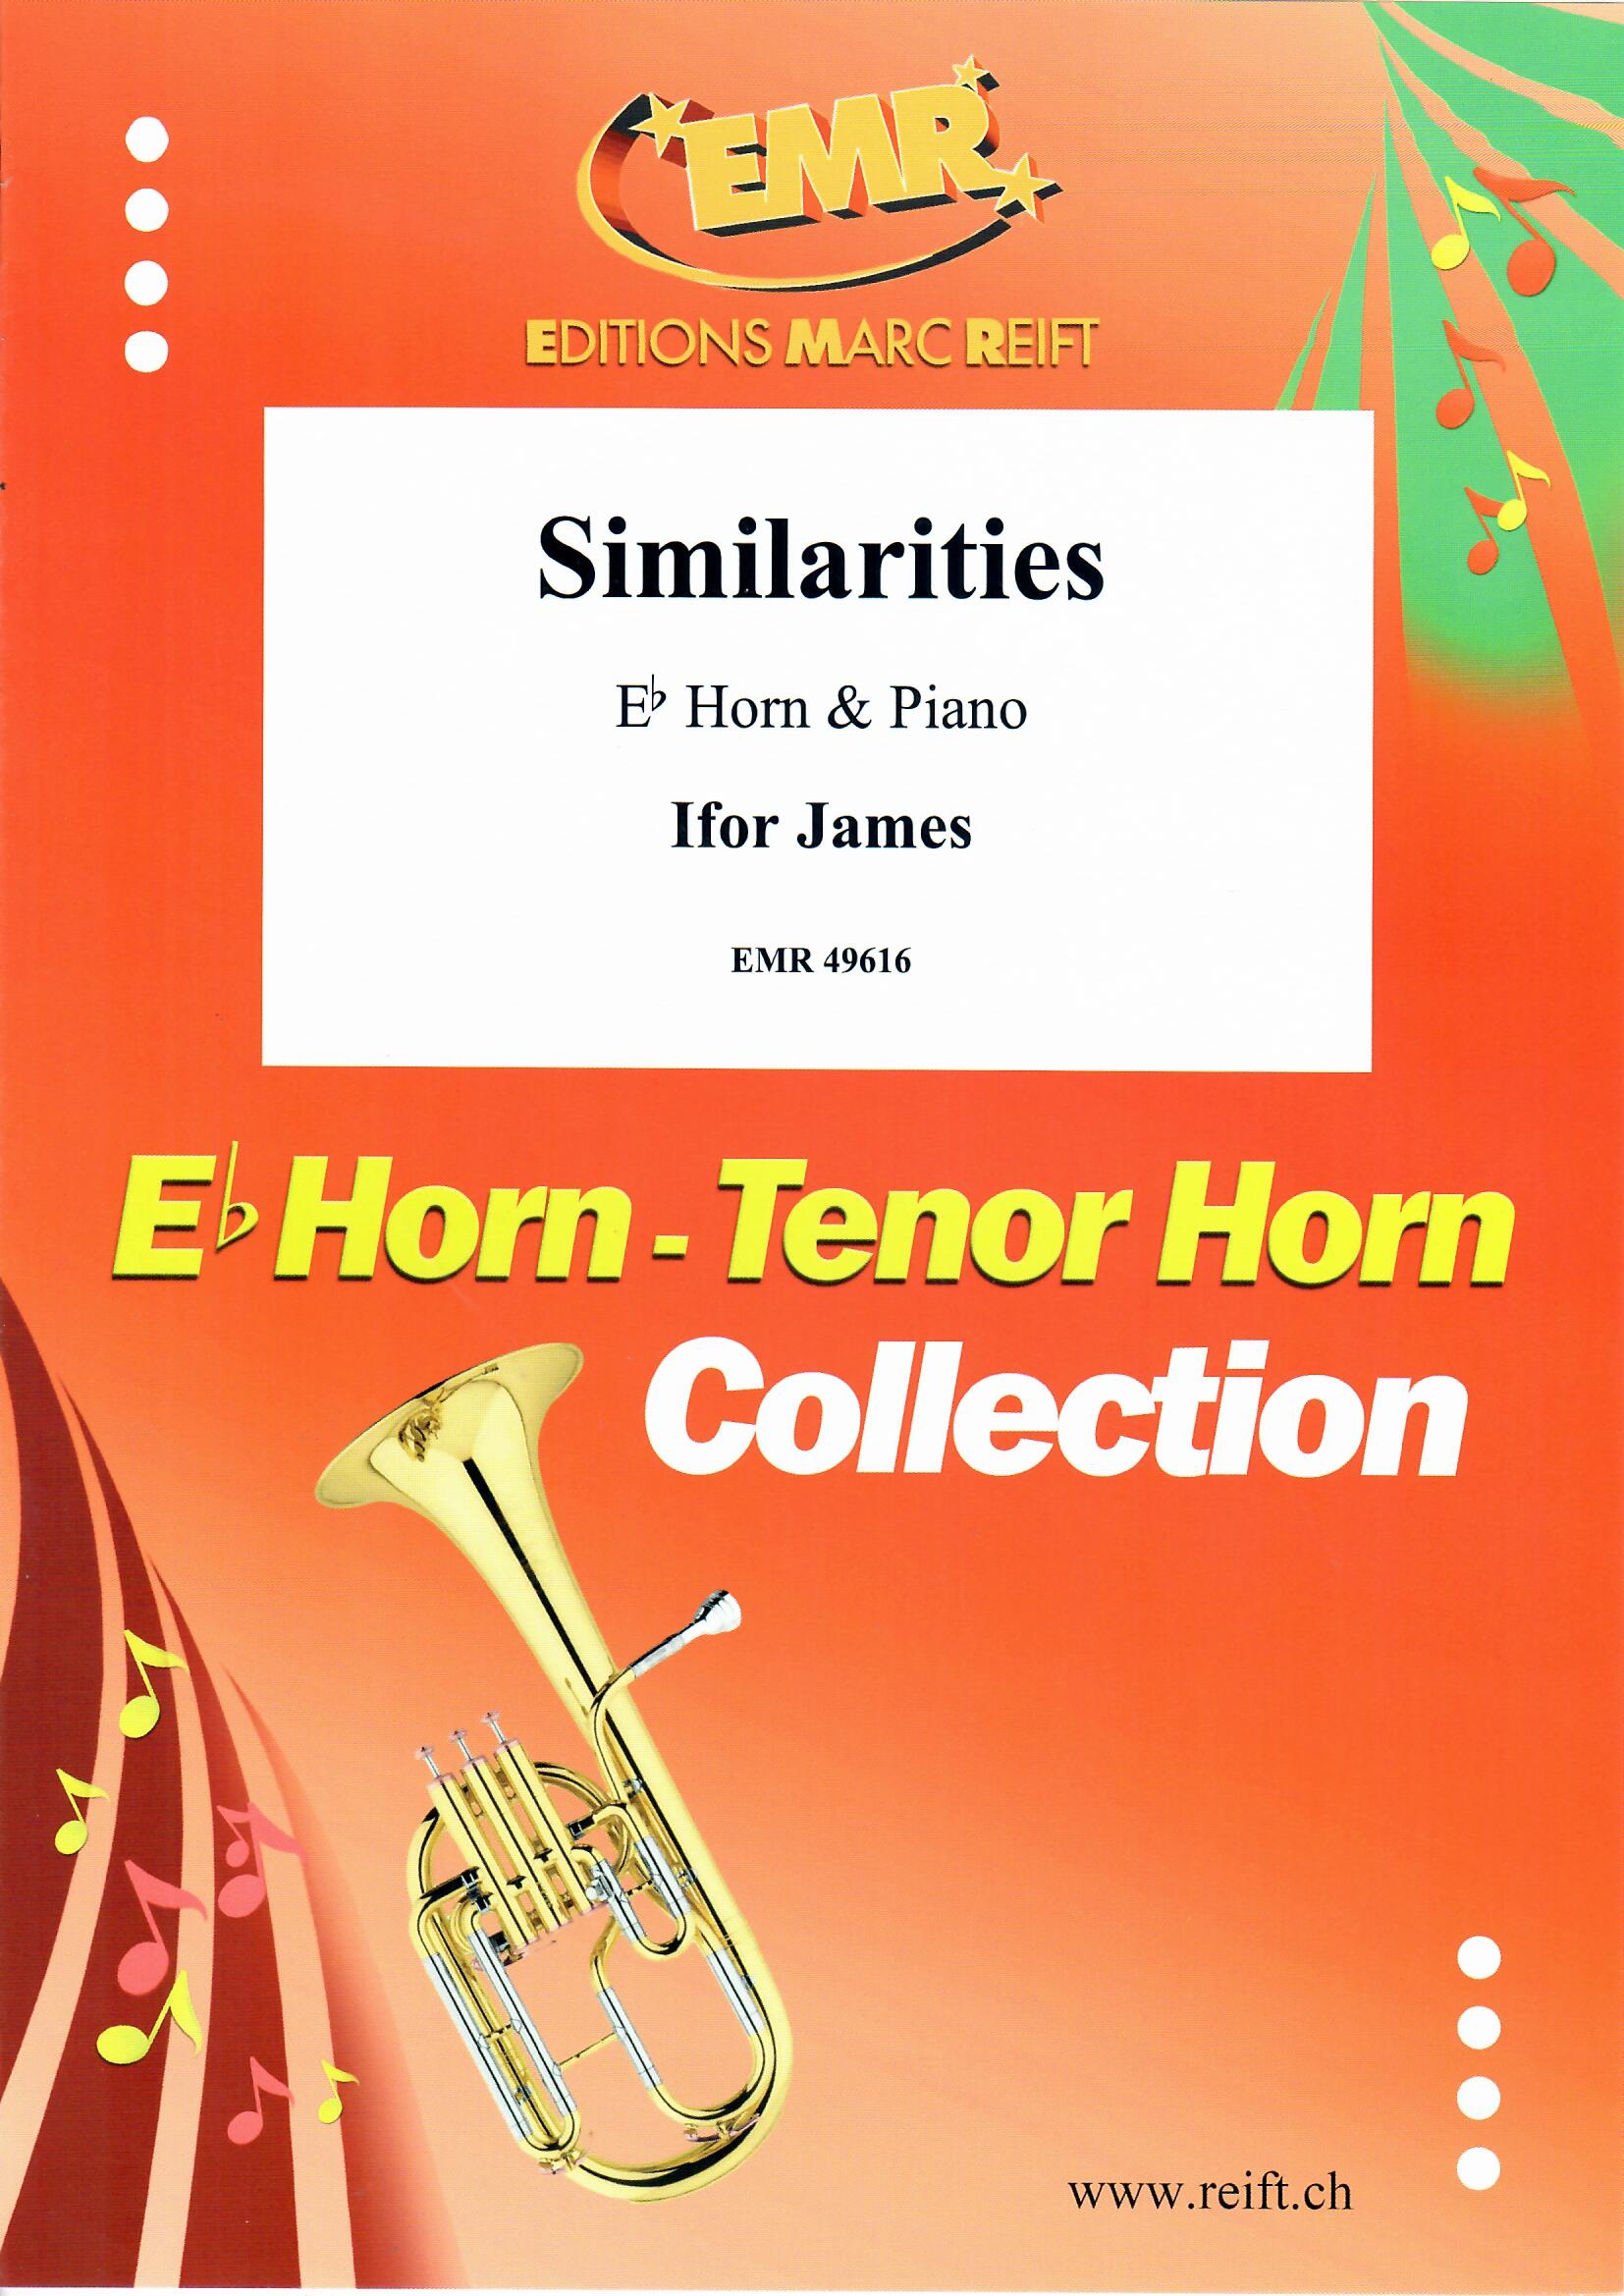 SIMILARITIES, NEW & RECENT Publications, SOLOS for E♭. Horn